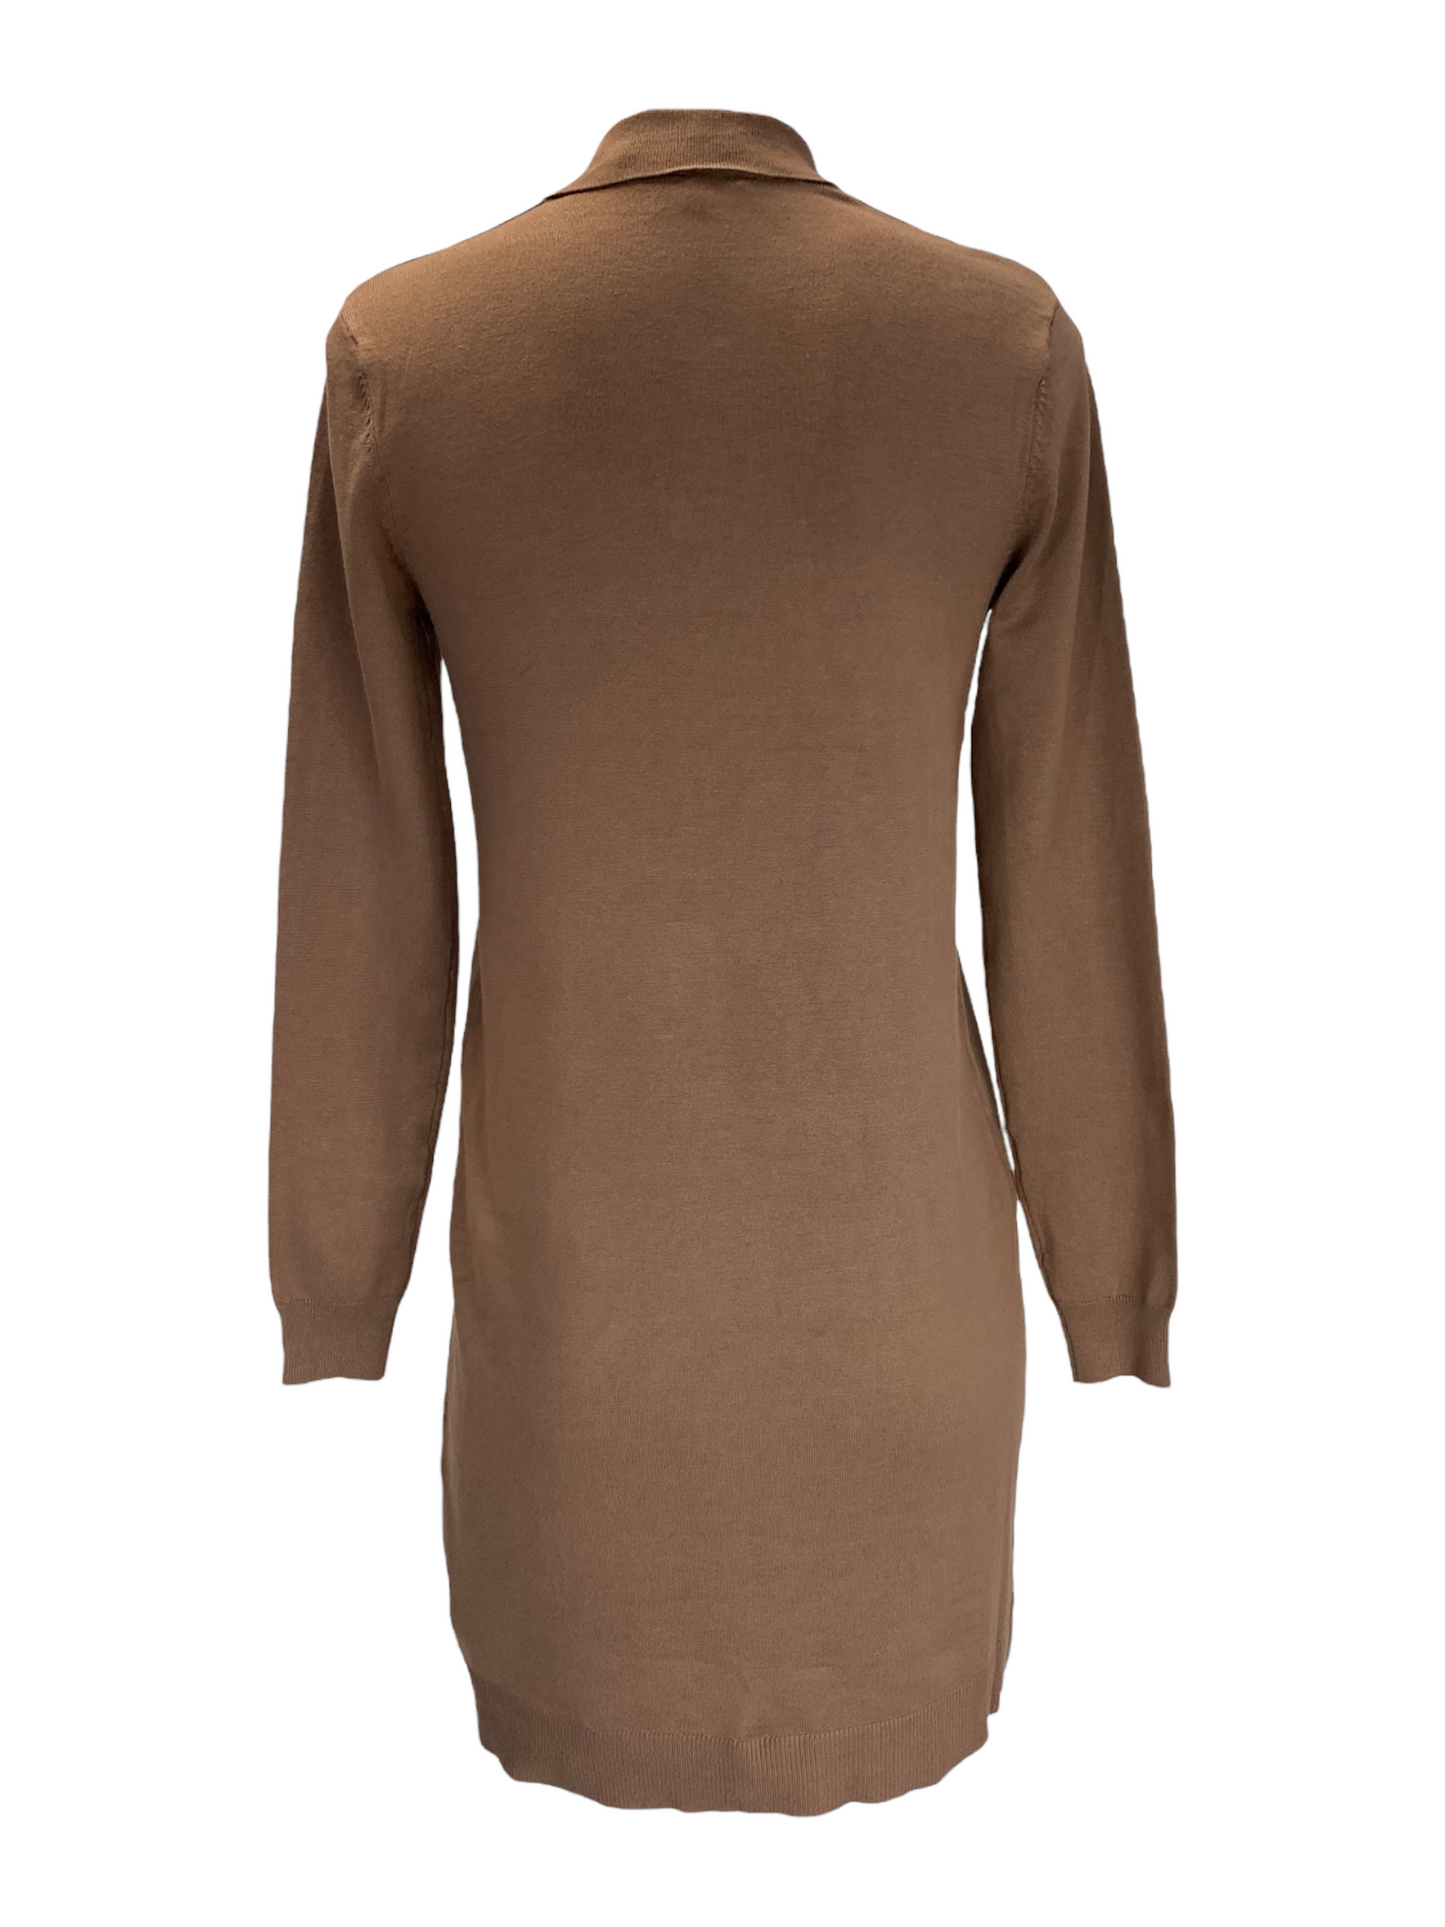 Robe en tricot taupe Nass Woman pour femme